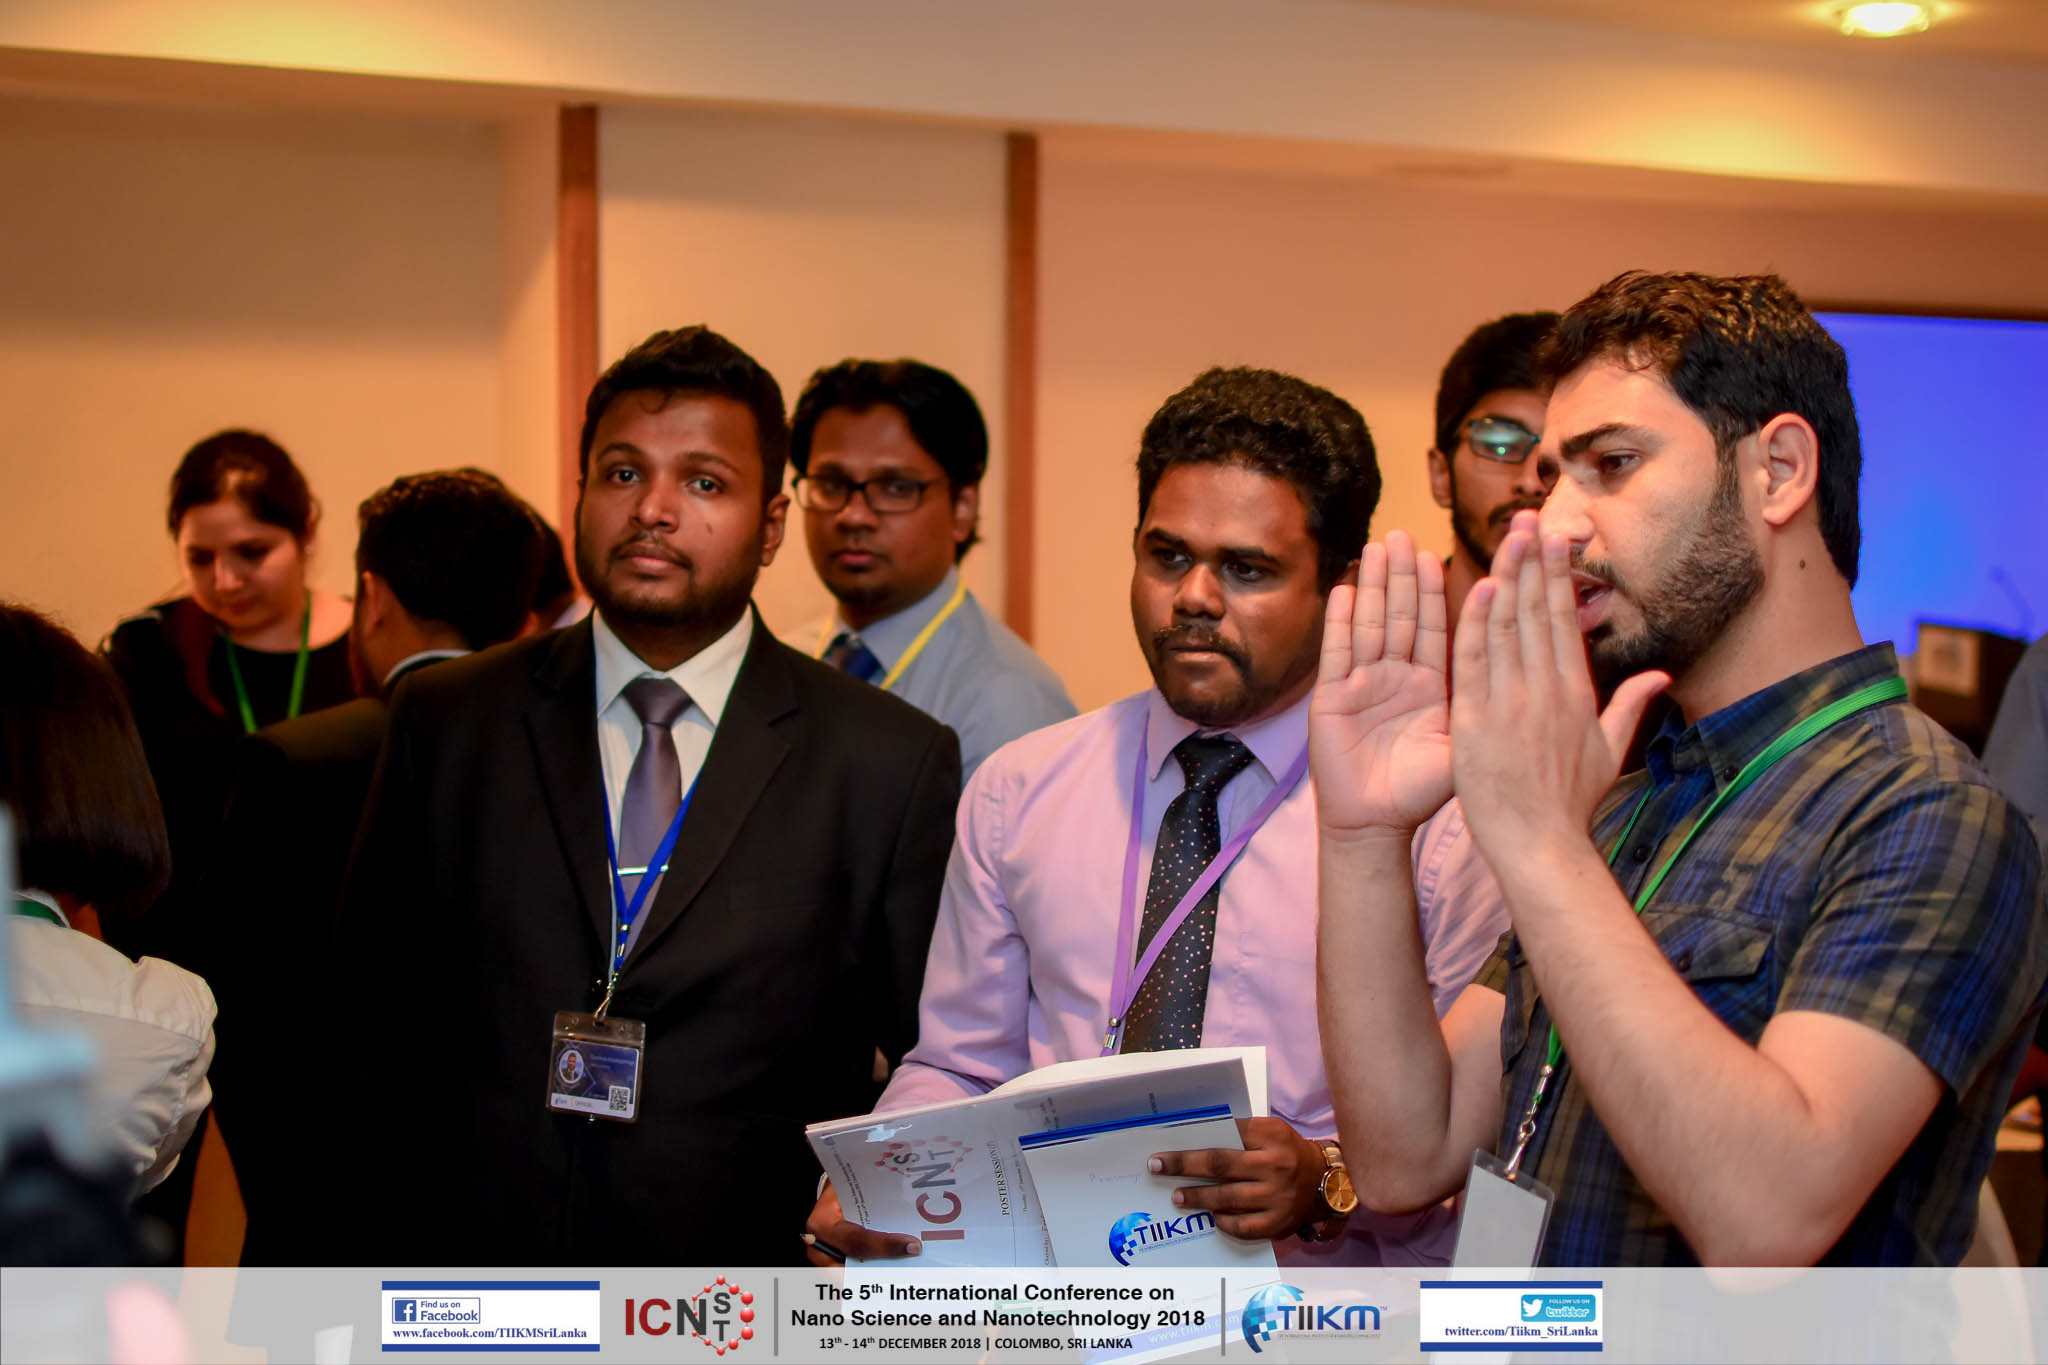 Photos ofThe 5th International Conference on Nano Science and Nanotechnology 2018 (ICNSNT 2018)